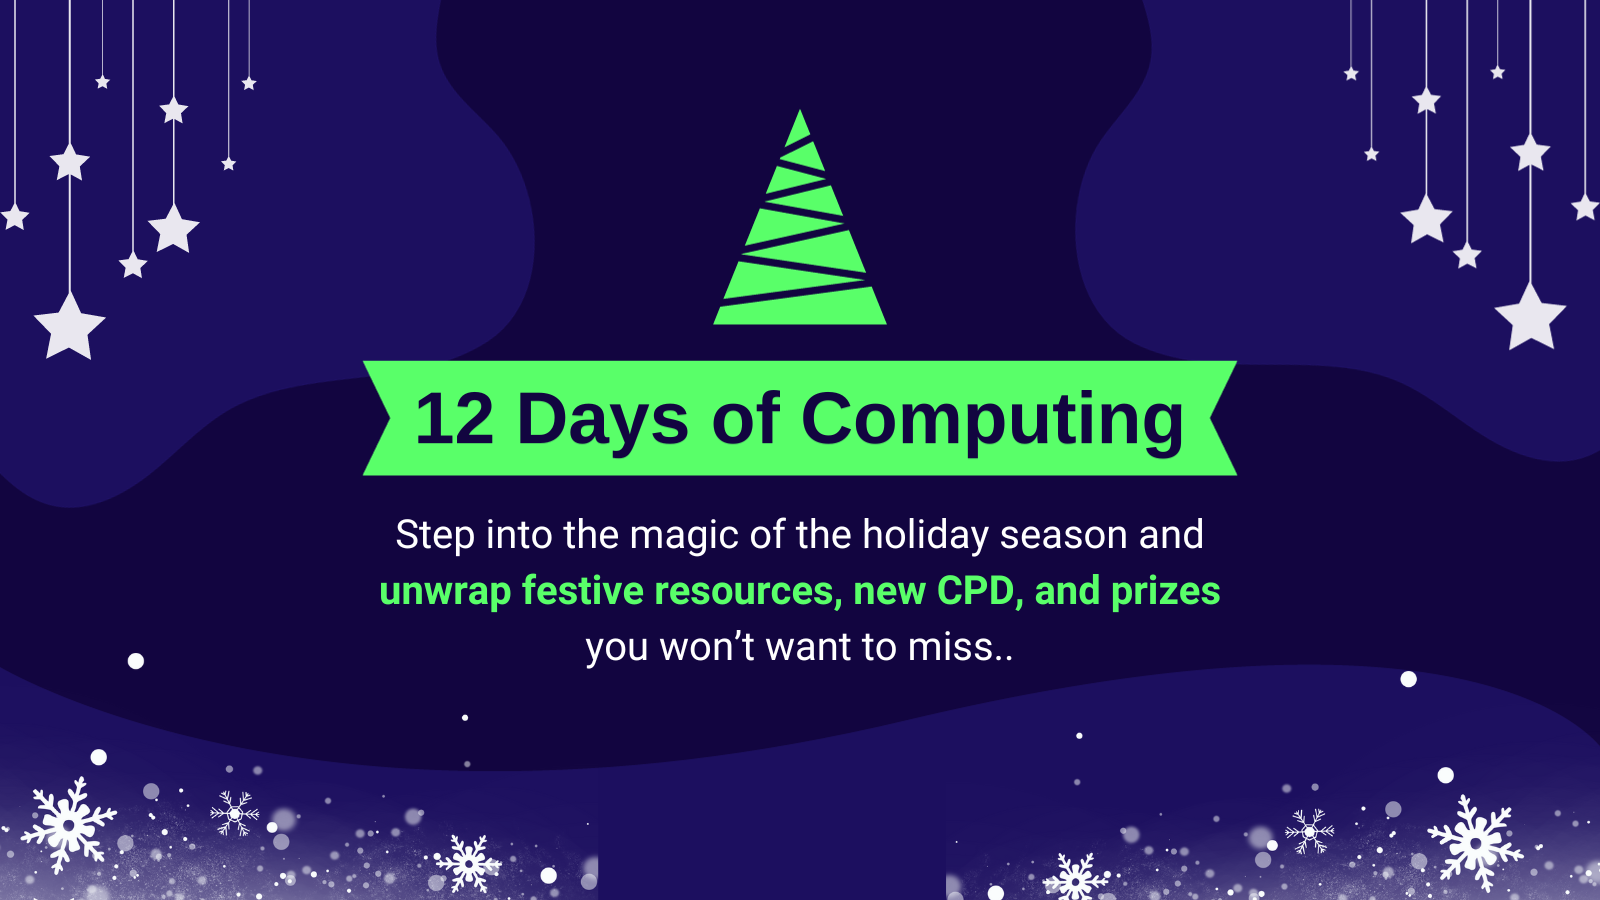 12 Days of Computing: Unwrap festive resources, new CPD and prizes not to be missed!